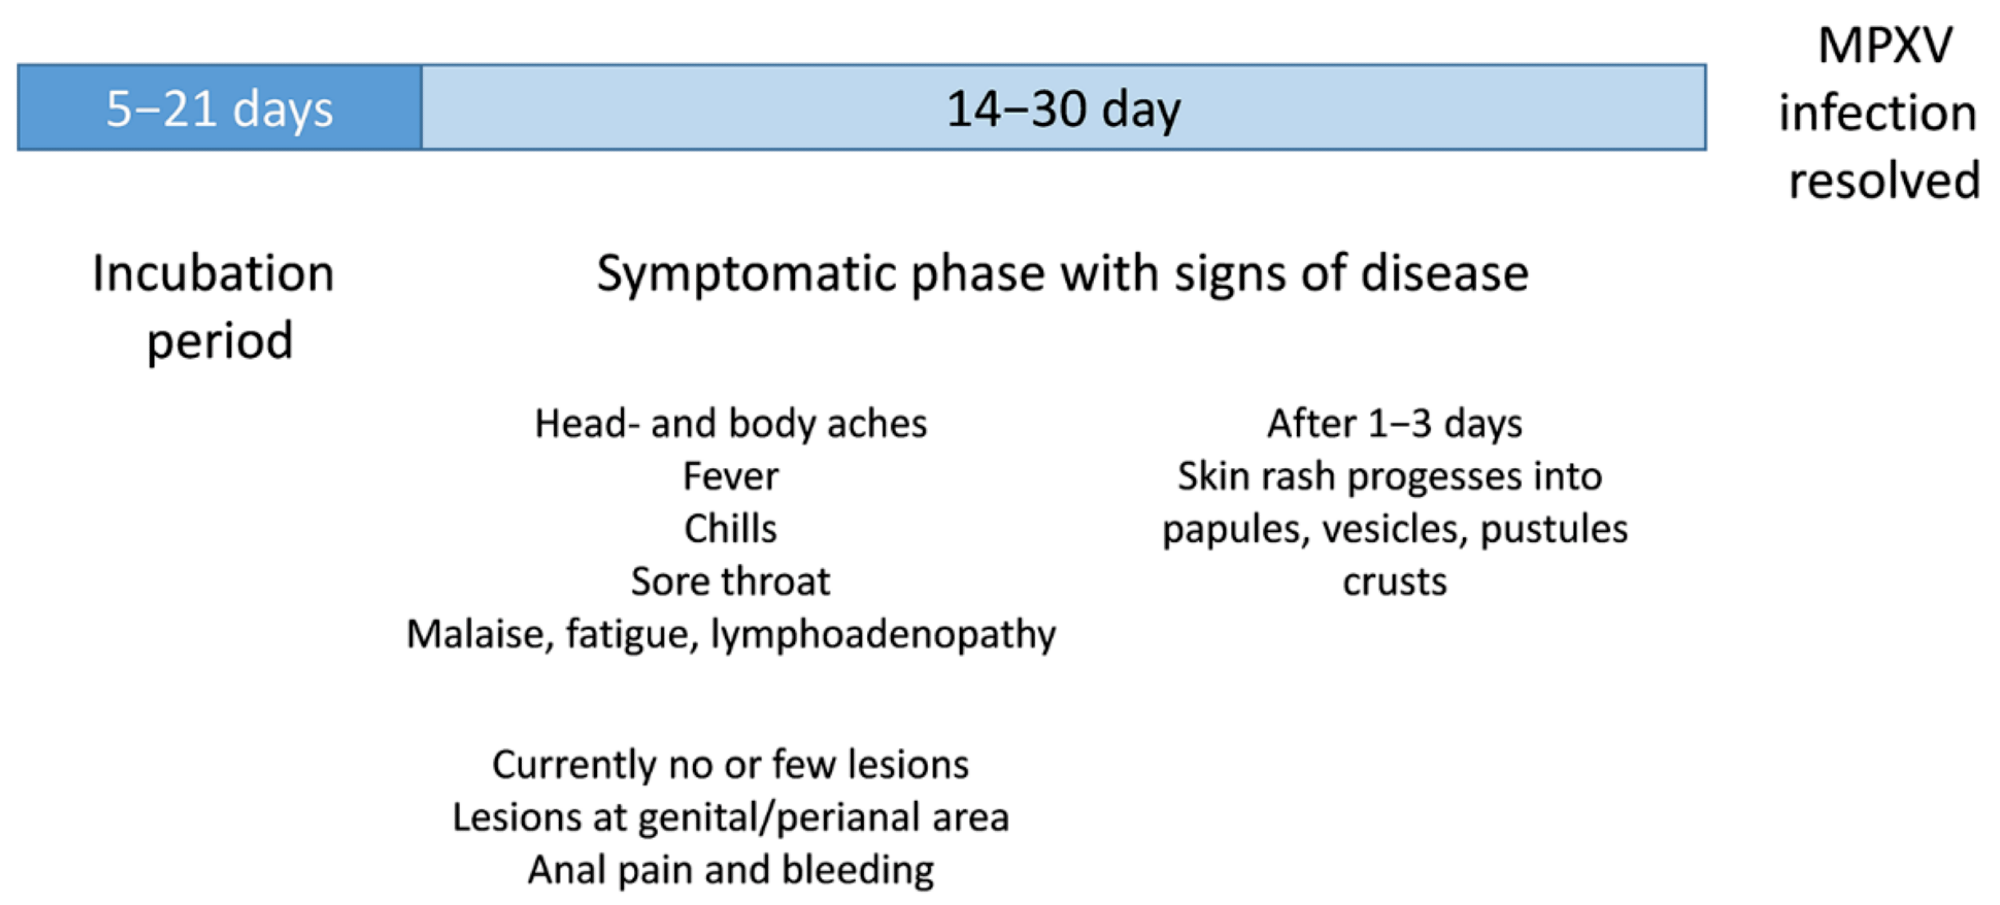 Schematic illustration of clinical signs of a MPXV infection